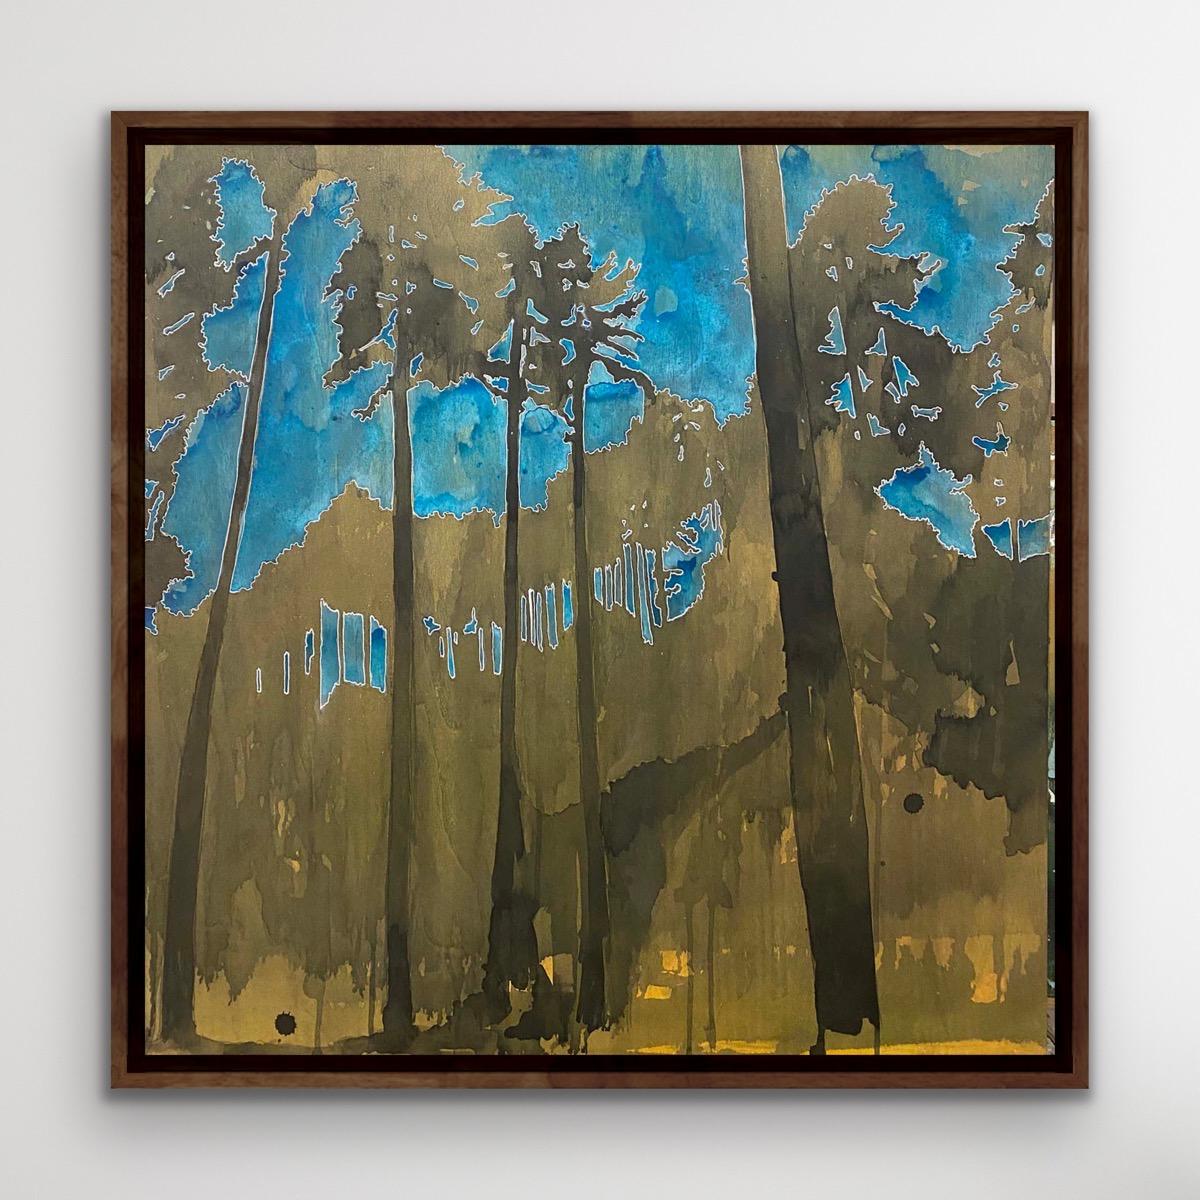 The study of negative space and how it implies depth and perspective has always interested me. I enjoy playing with the idea of foreground and background, and I love the idea of suggesting a subject, in this case a tree canopy, but then abstracting